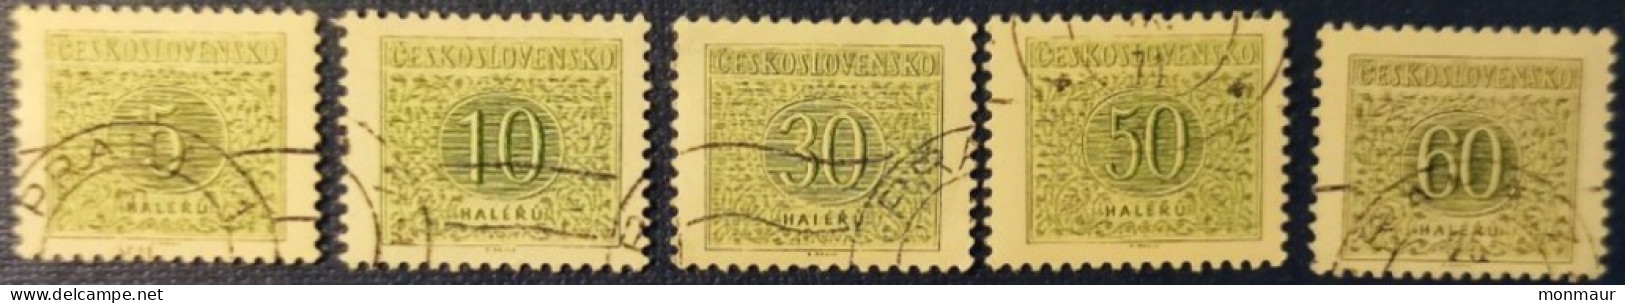 CECOSLOVACCHIA 1963 TIMBRE TAXE Yt 92-93-94-95-96 DENT. 11 1/2 - Strafport